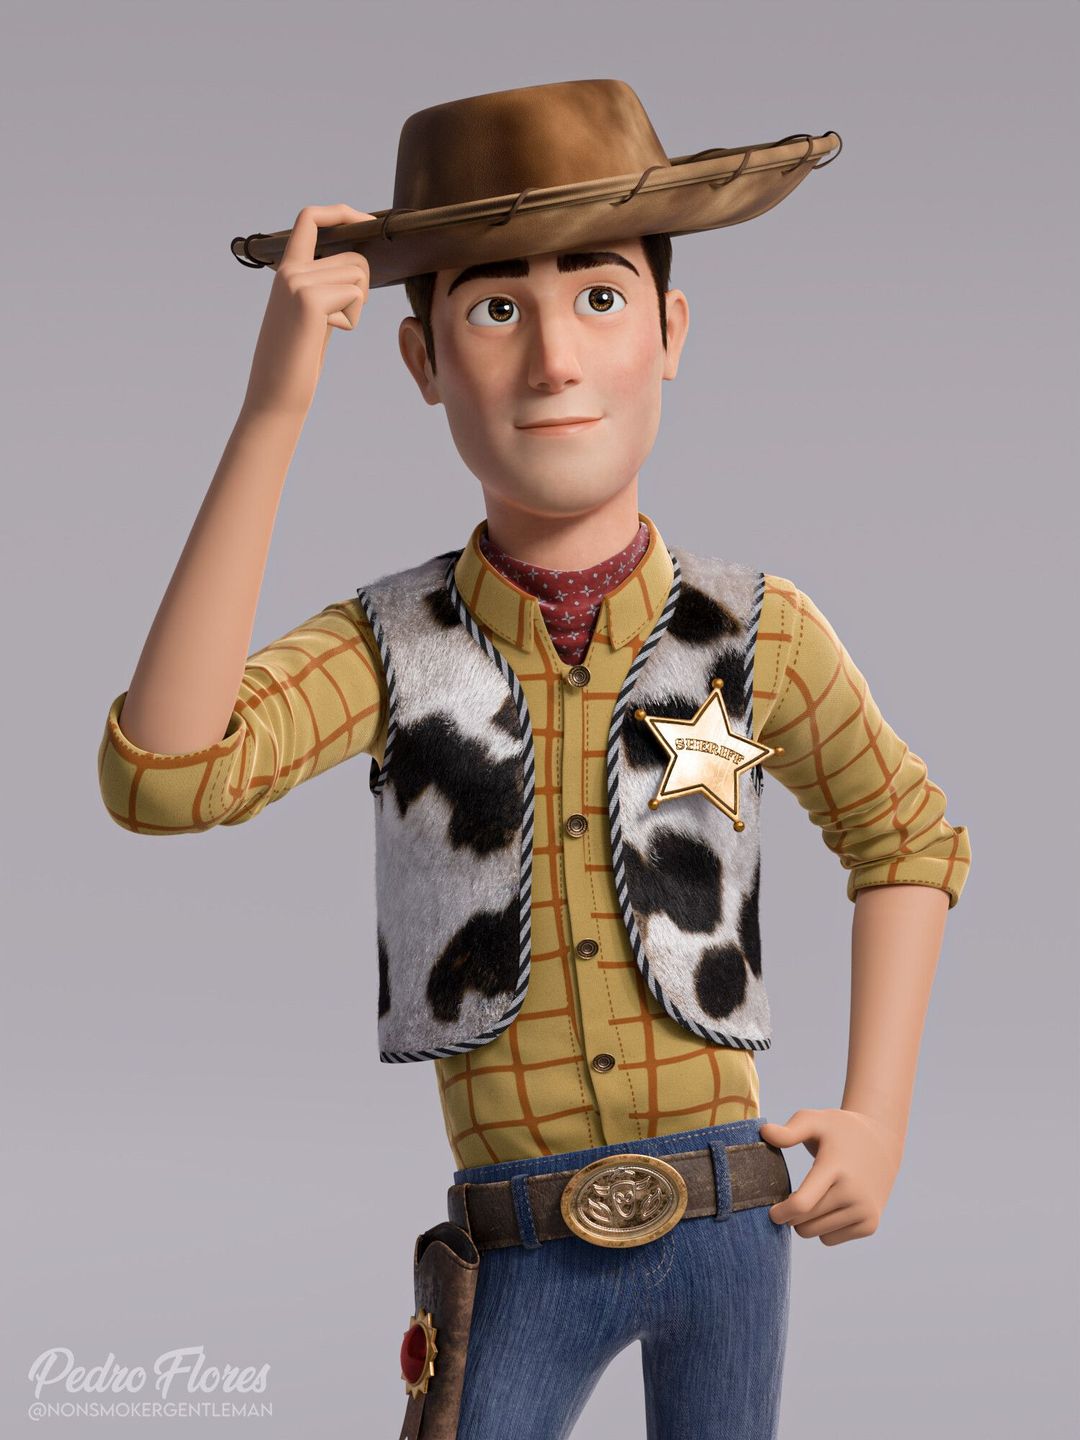 Woody 3D model in a Lightyear movie style by Pedro Flores ...